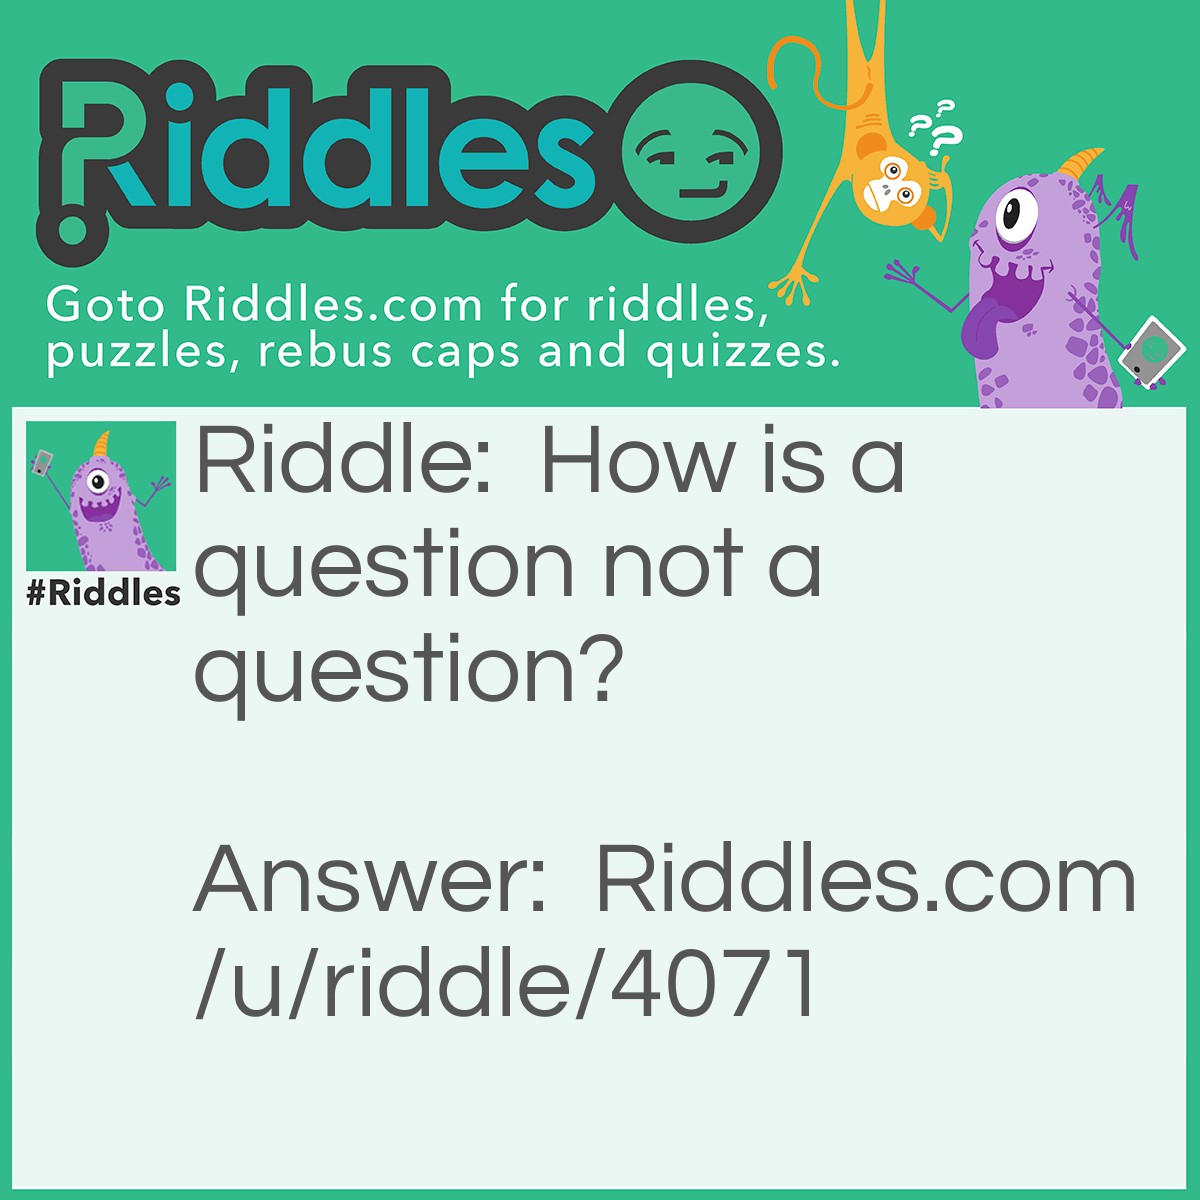 Riddle: How is a question not a question? Answer: When you don't ask a question at all.